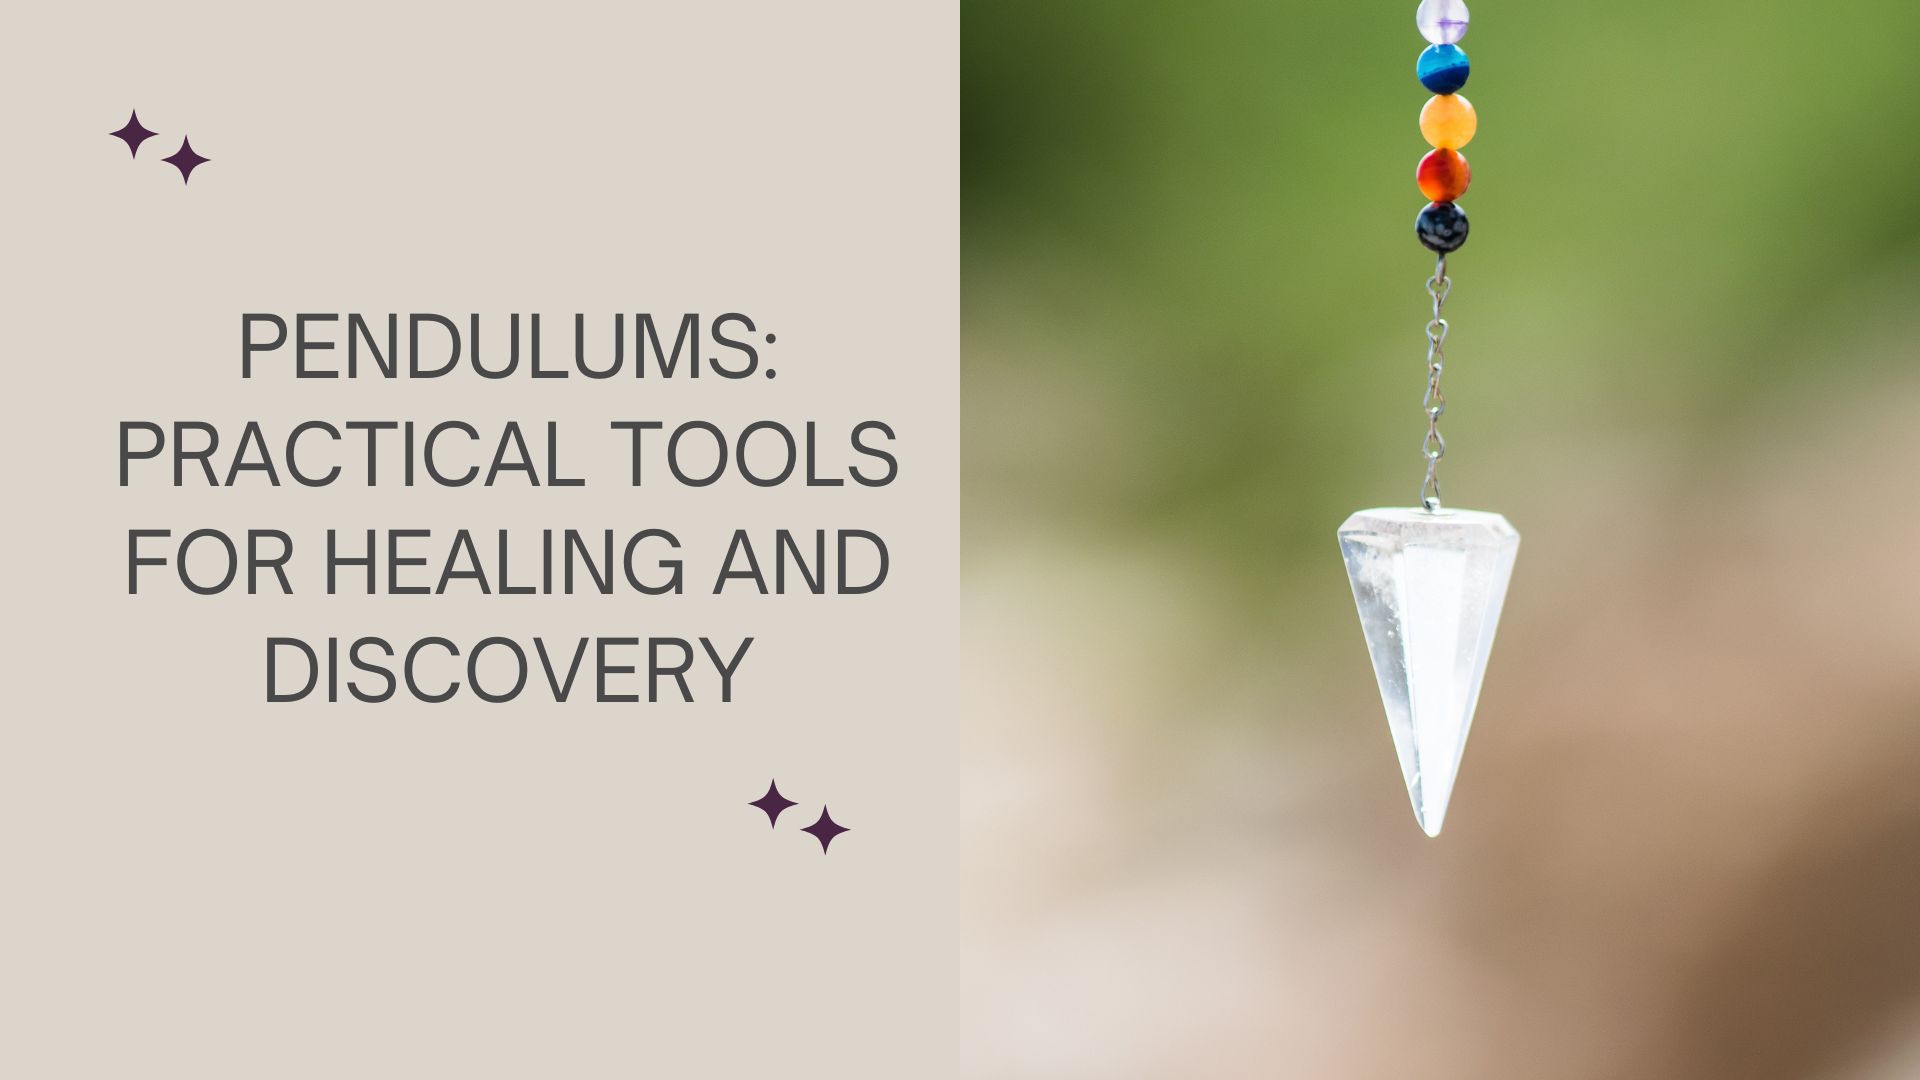 Pendulums: Practical Tools for Healing and Discovery